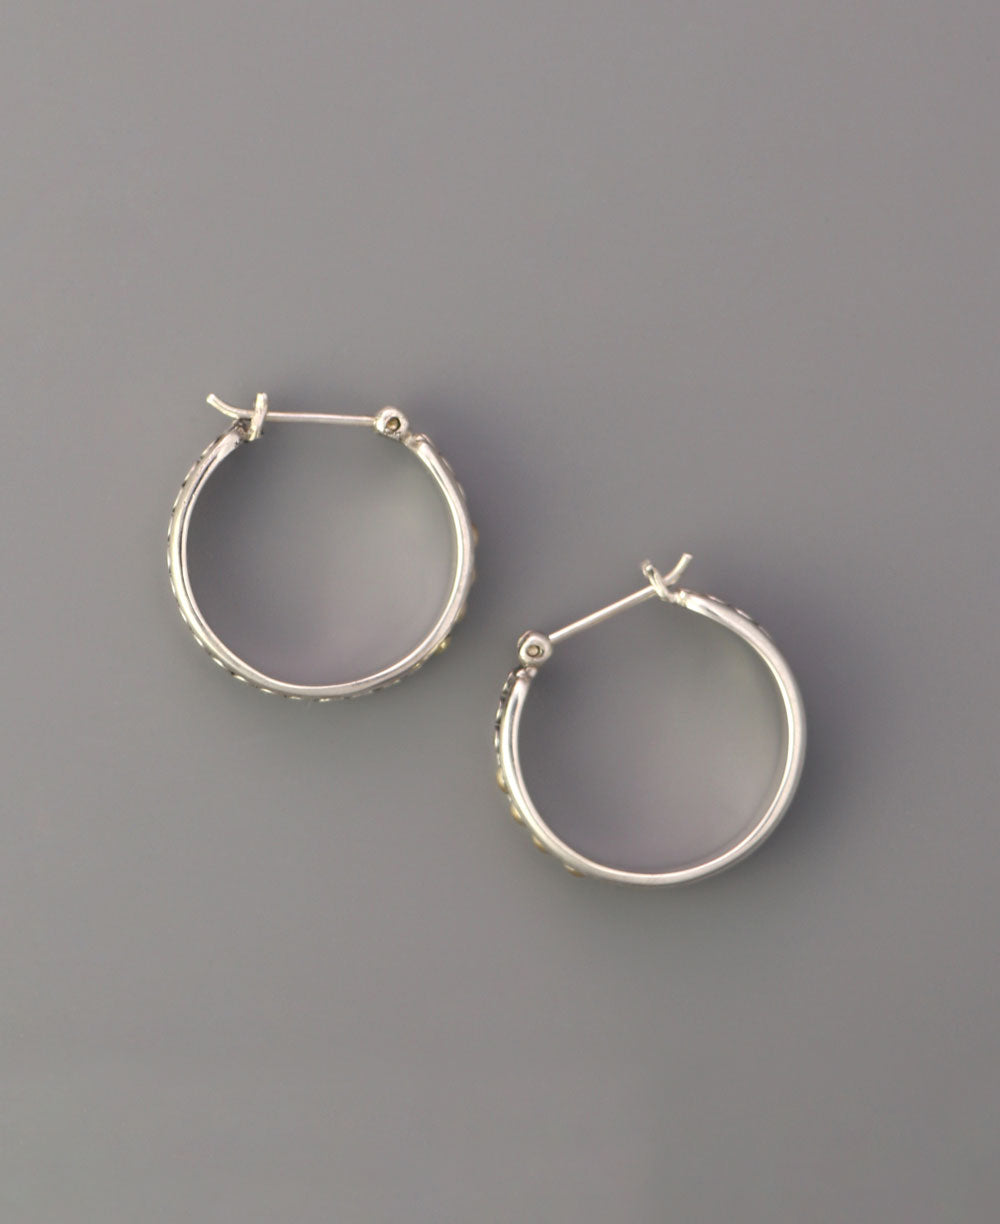 Bali crafted hoop earrings with gold accents